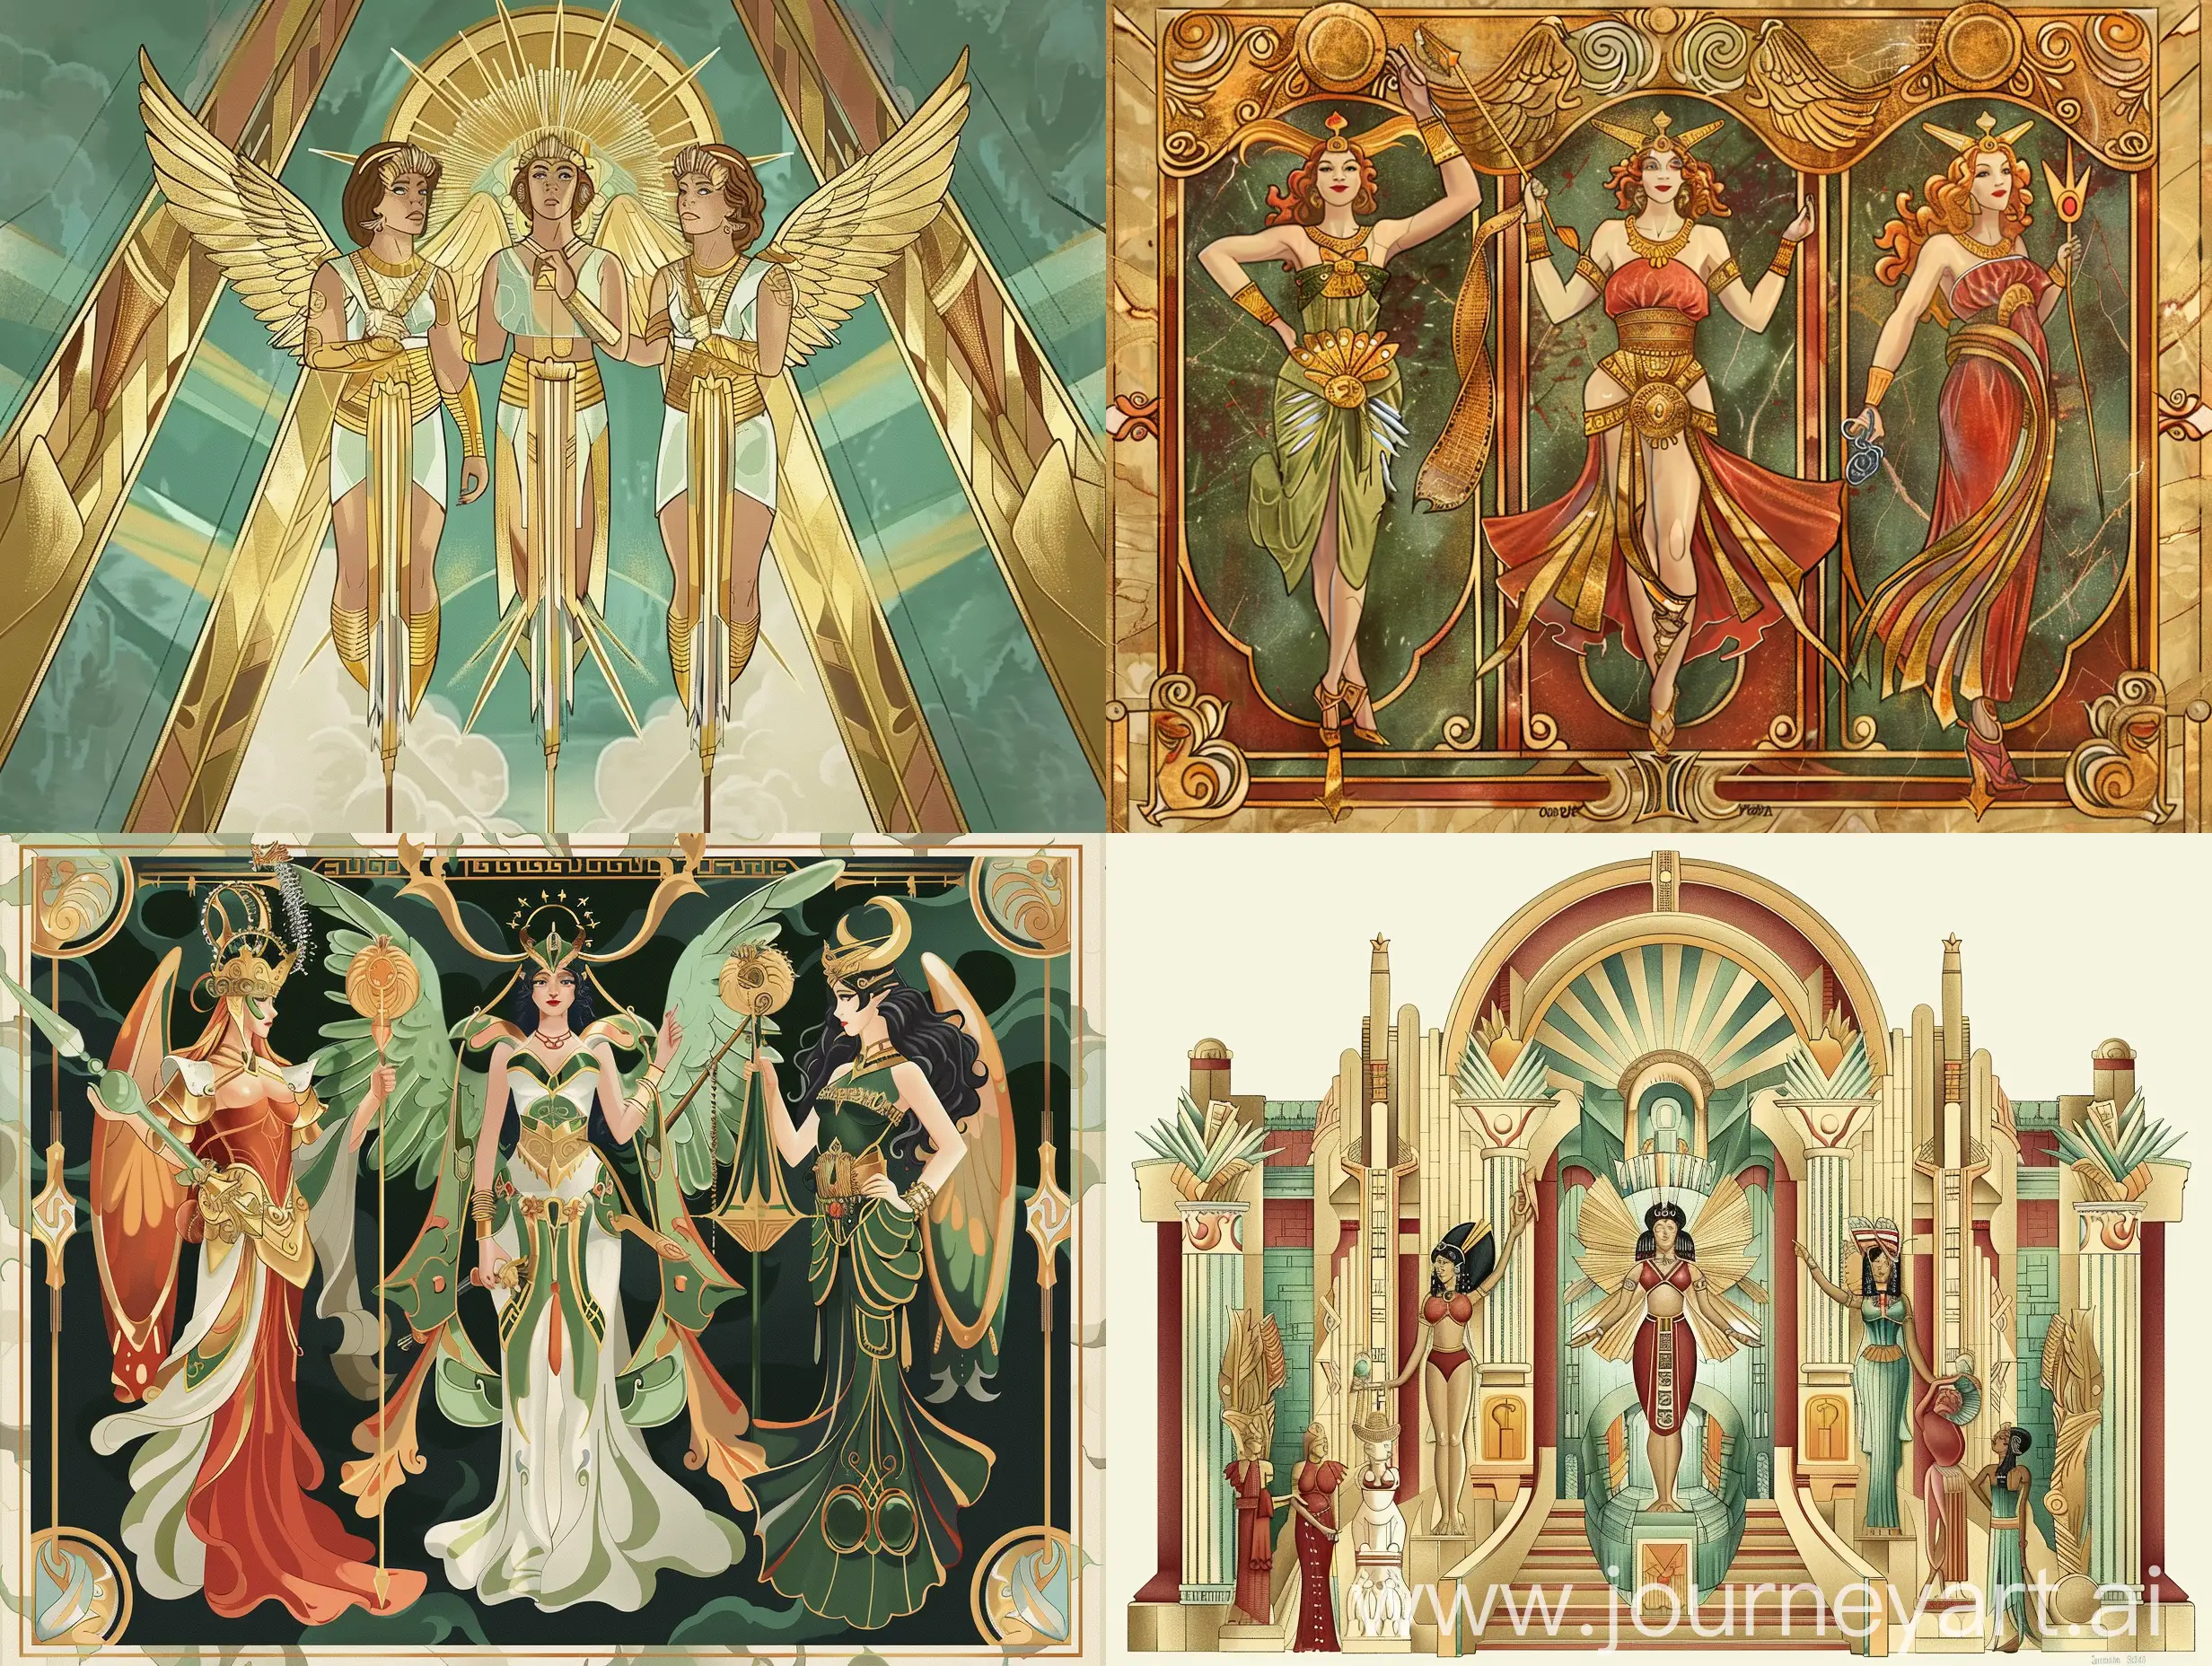 pantheon of femaleled gods and goddesses embodying protecting and ruling over the various aspects of the lands culture and diverse multiethnic people of California Art Deco Streamline Modern New Deal vibes